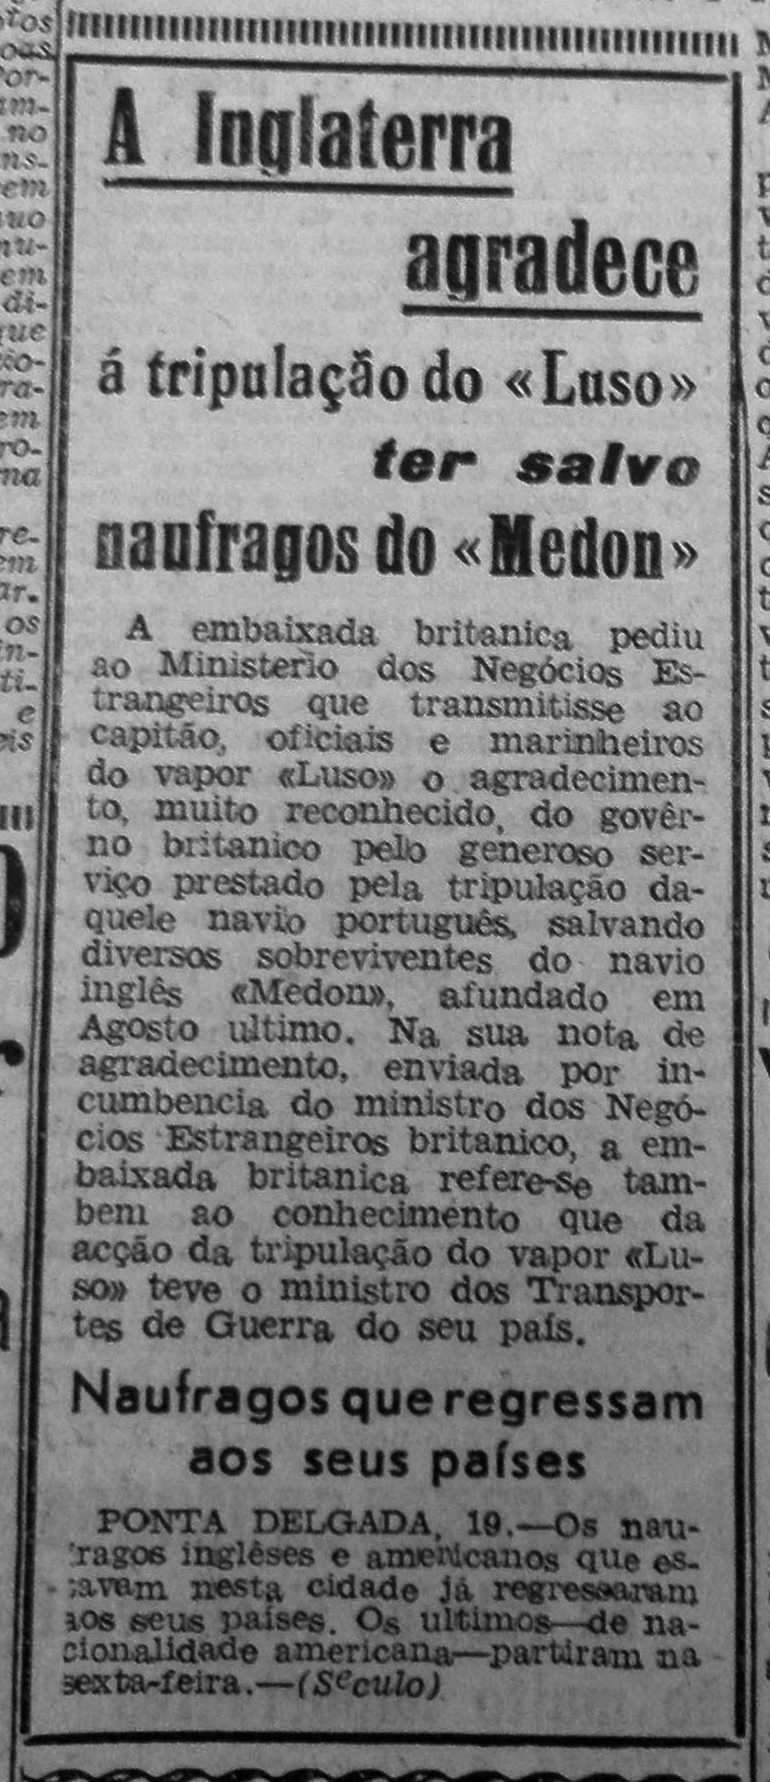 Story published in the newspaper "O Século" 